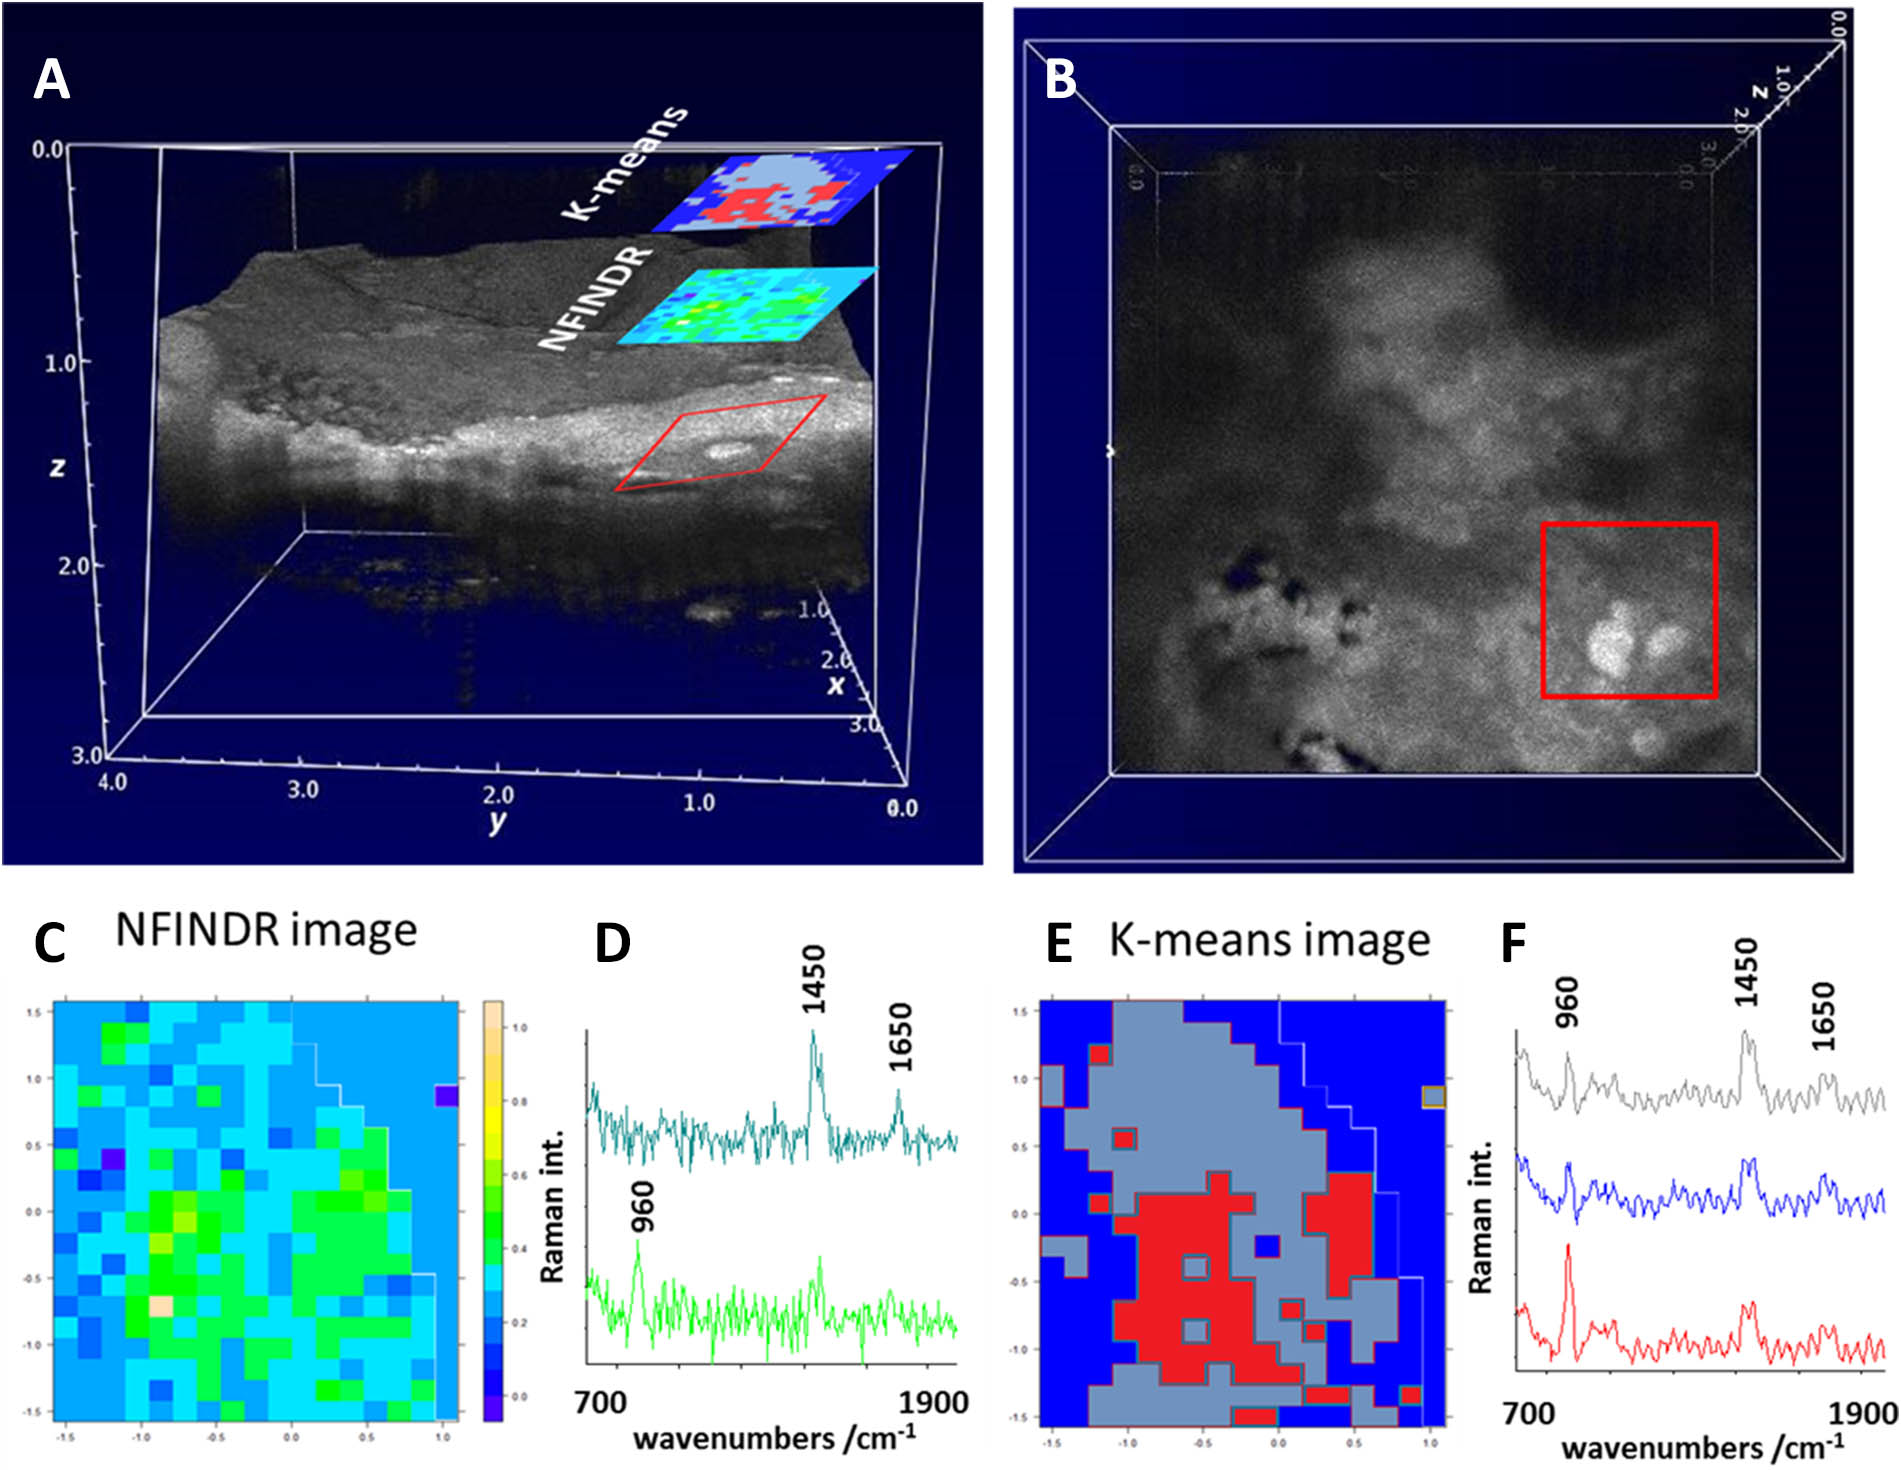 (Color online) OCT and Raman images of the calcified plaque deposition also shown in Figure 1. (A) and (B) OCT C and B scans of the aorta wall, whereby (B) shows the top view. The corresponding Raman images and the associated Raman spectra are shown in (C) and (D), as well as (E) and (F) for a value chain analysis (VCA) and K-means cluster analysis, respectively.